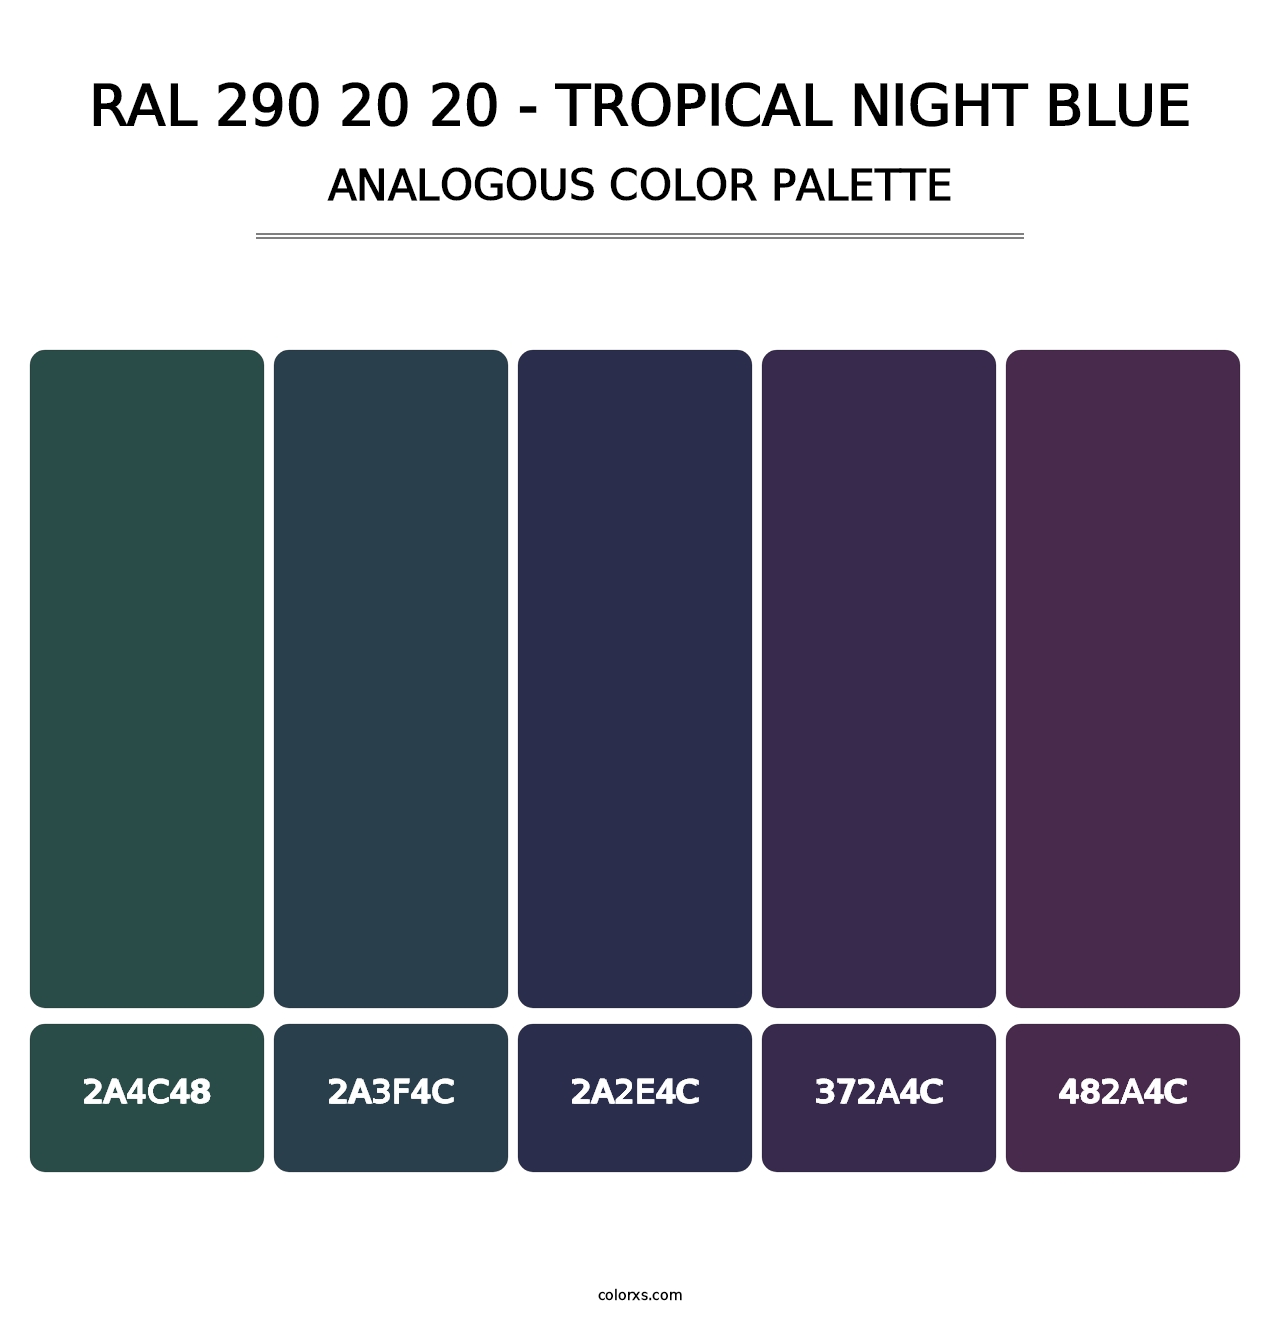 RAL 290 20 20 - Tropical Night Blue - Analogous Color Palette